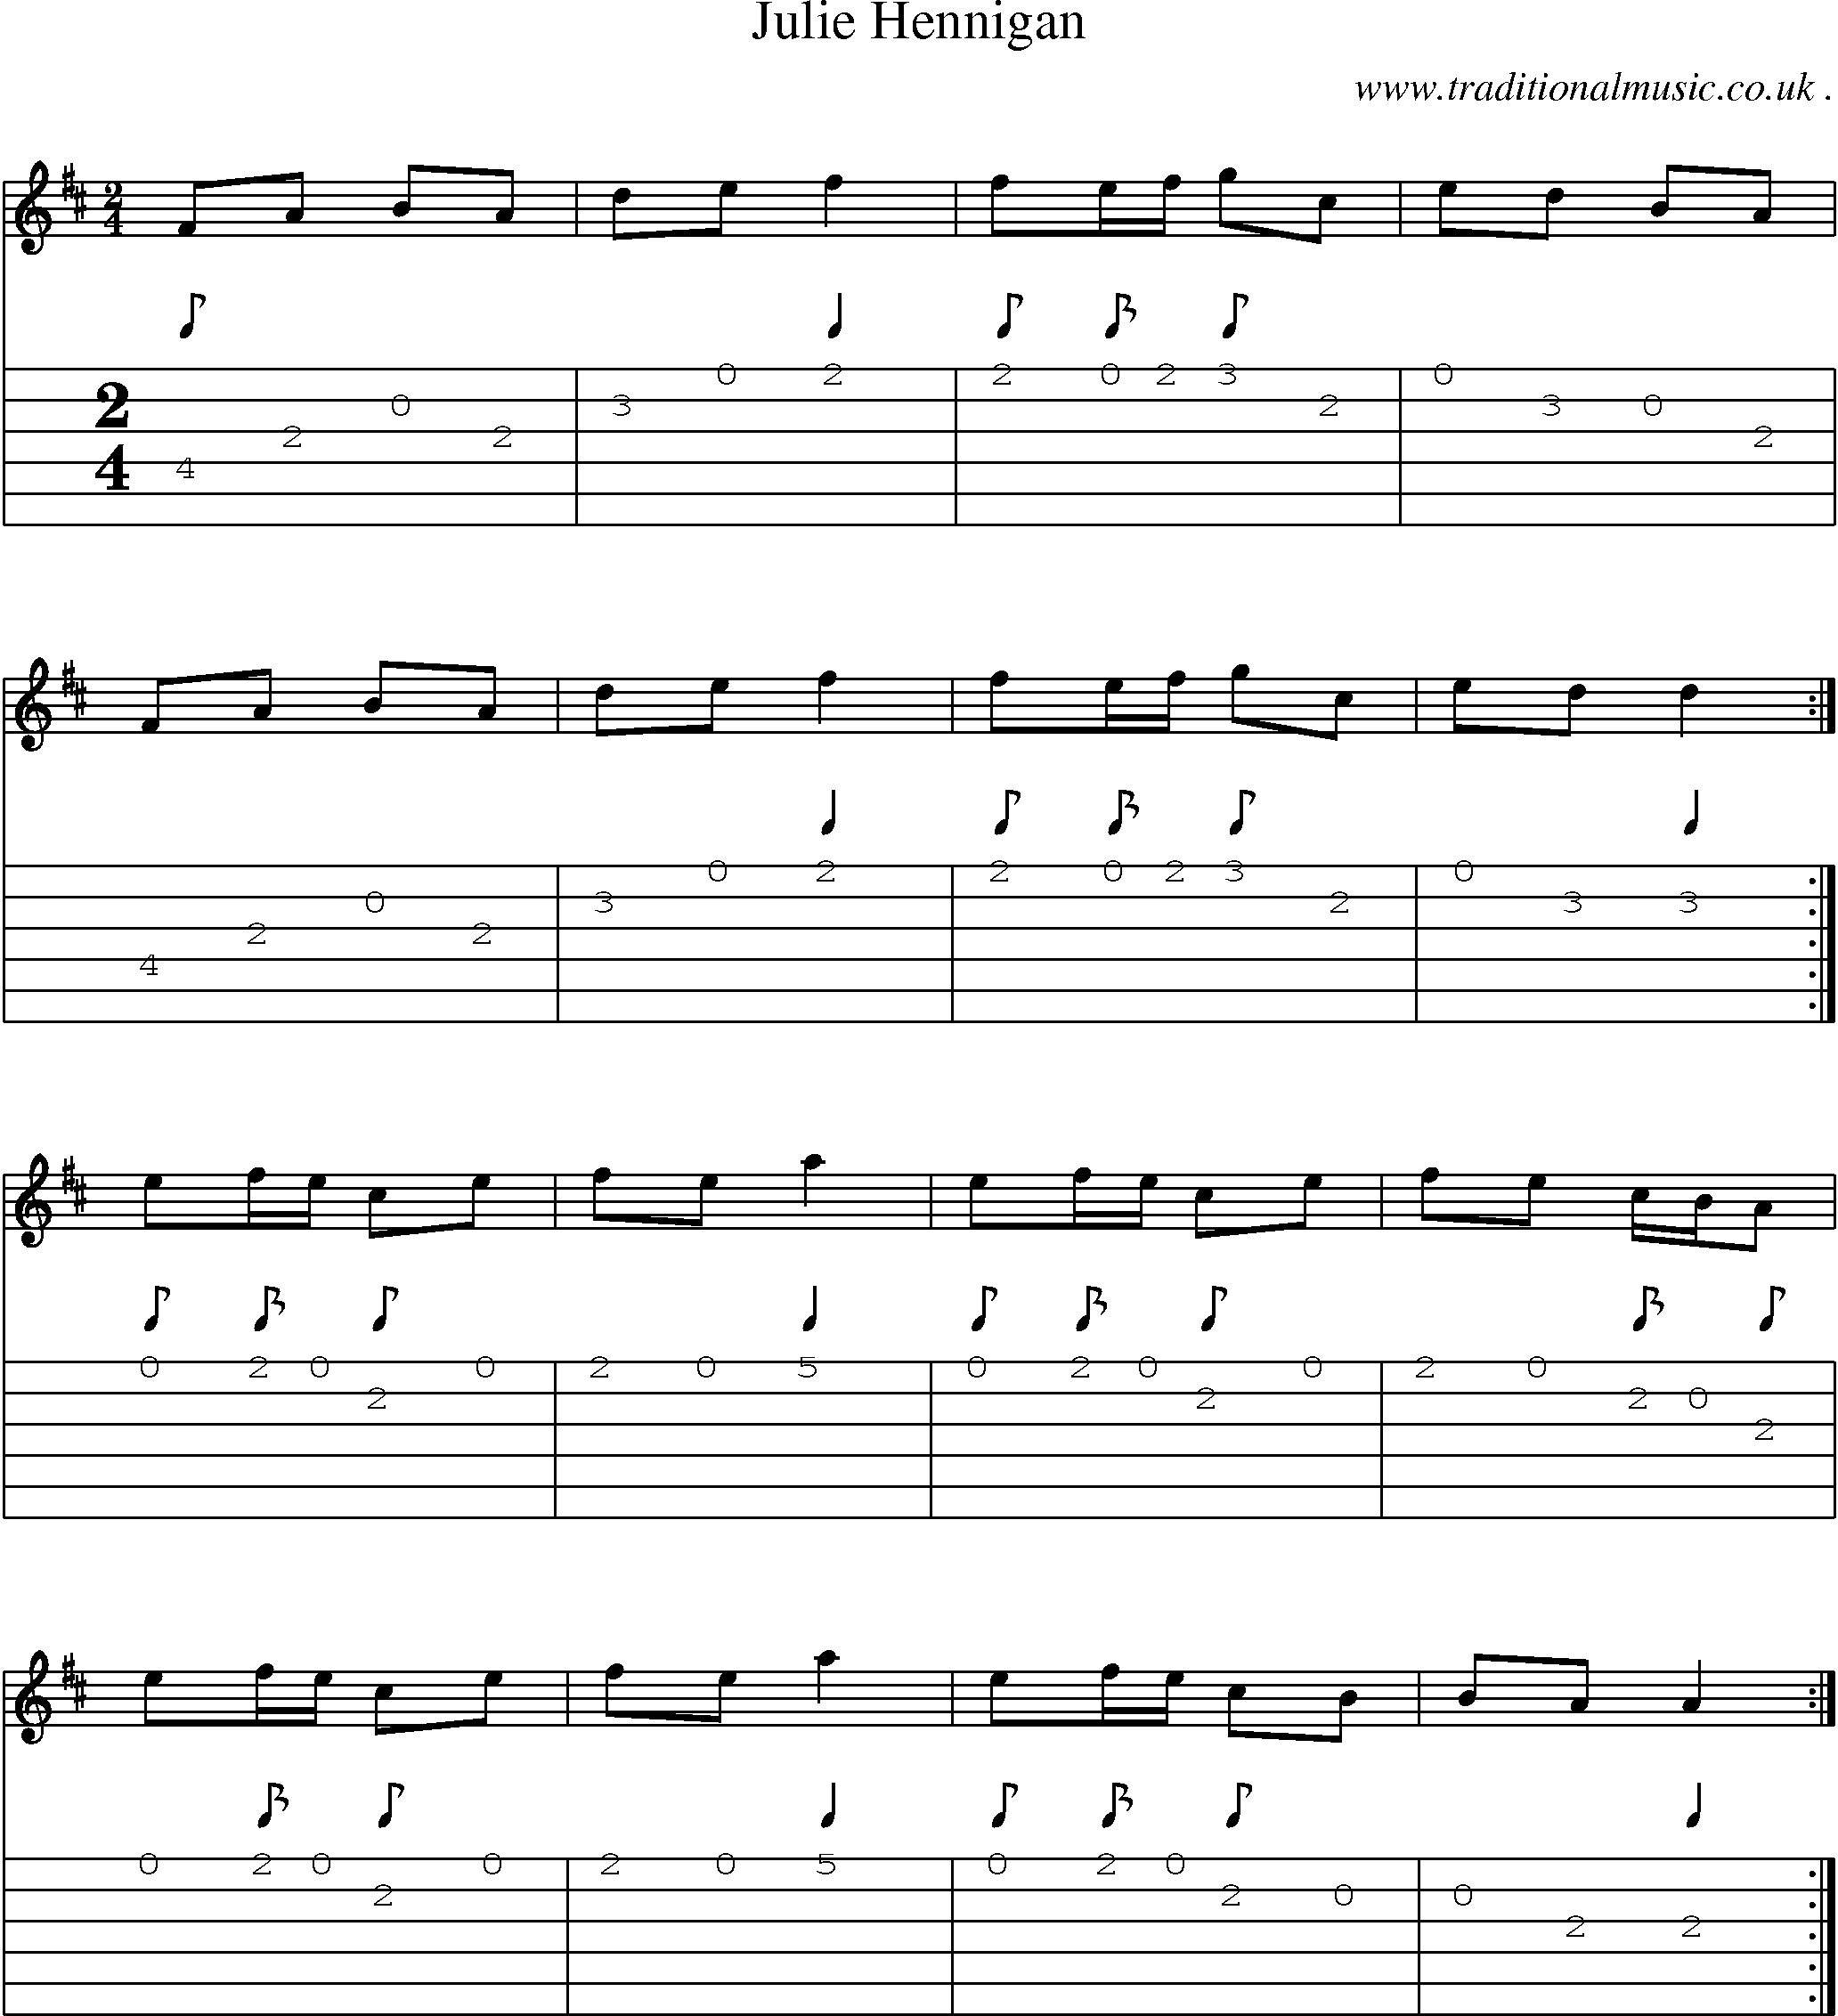 Sheet-Music and Guitar Tabs for Julie Hennigan